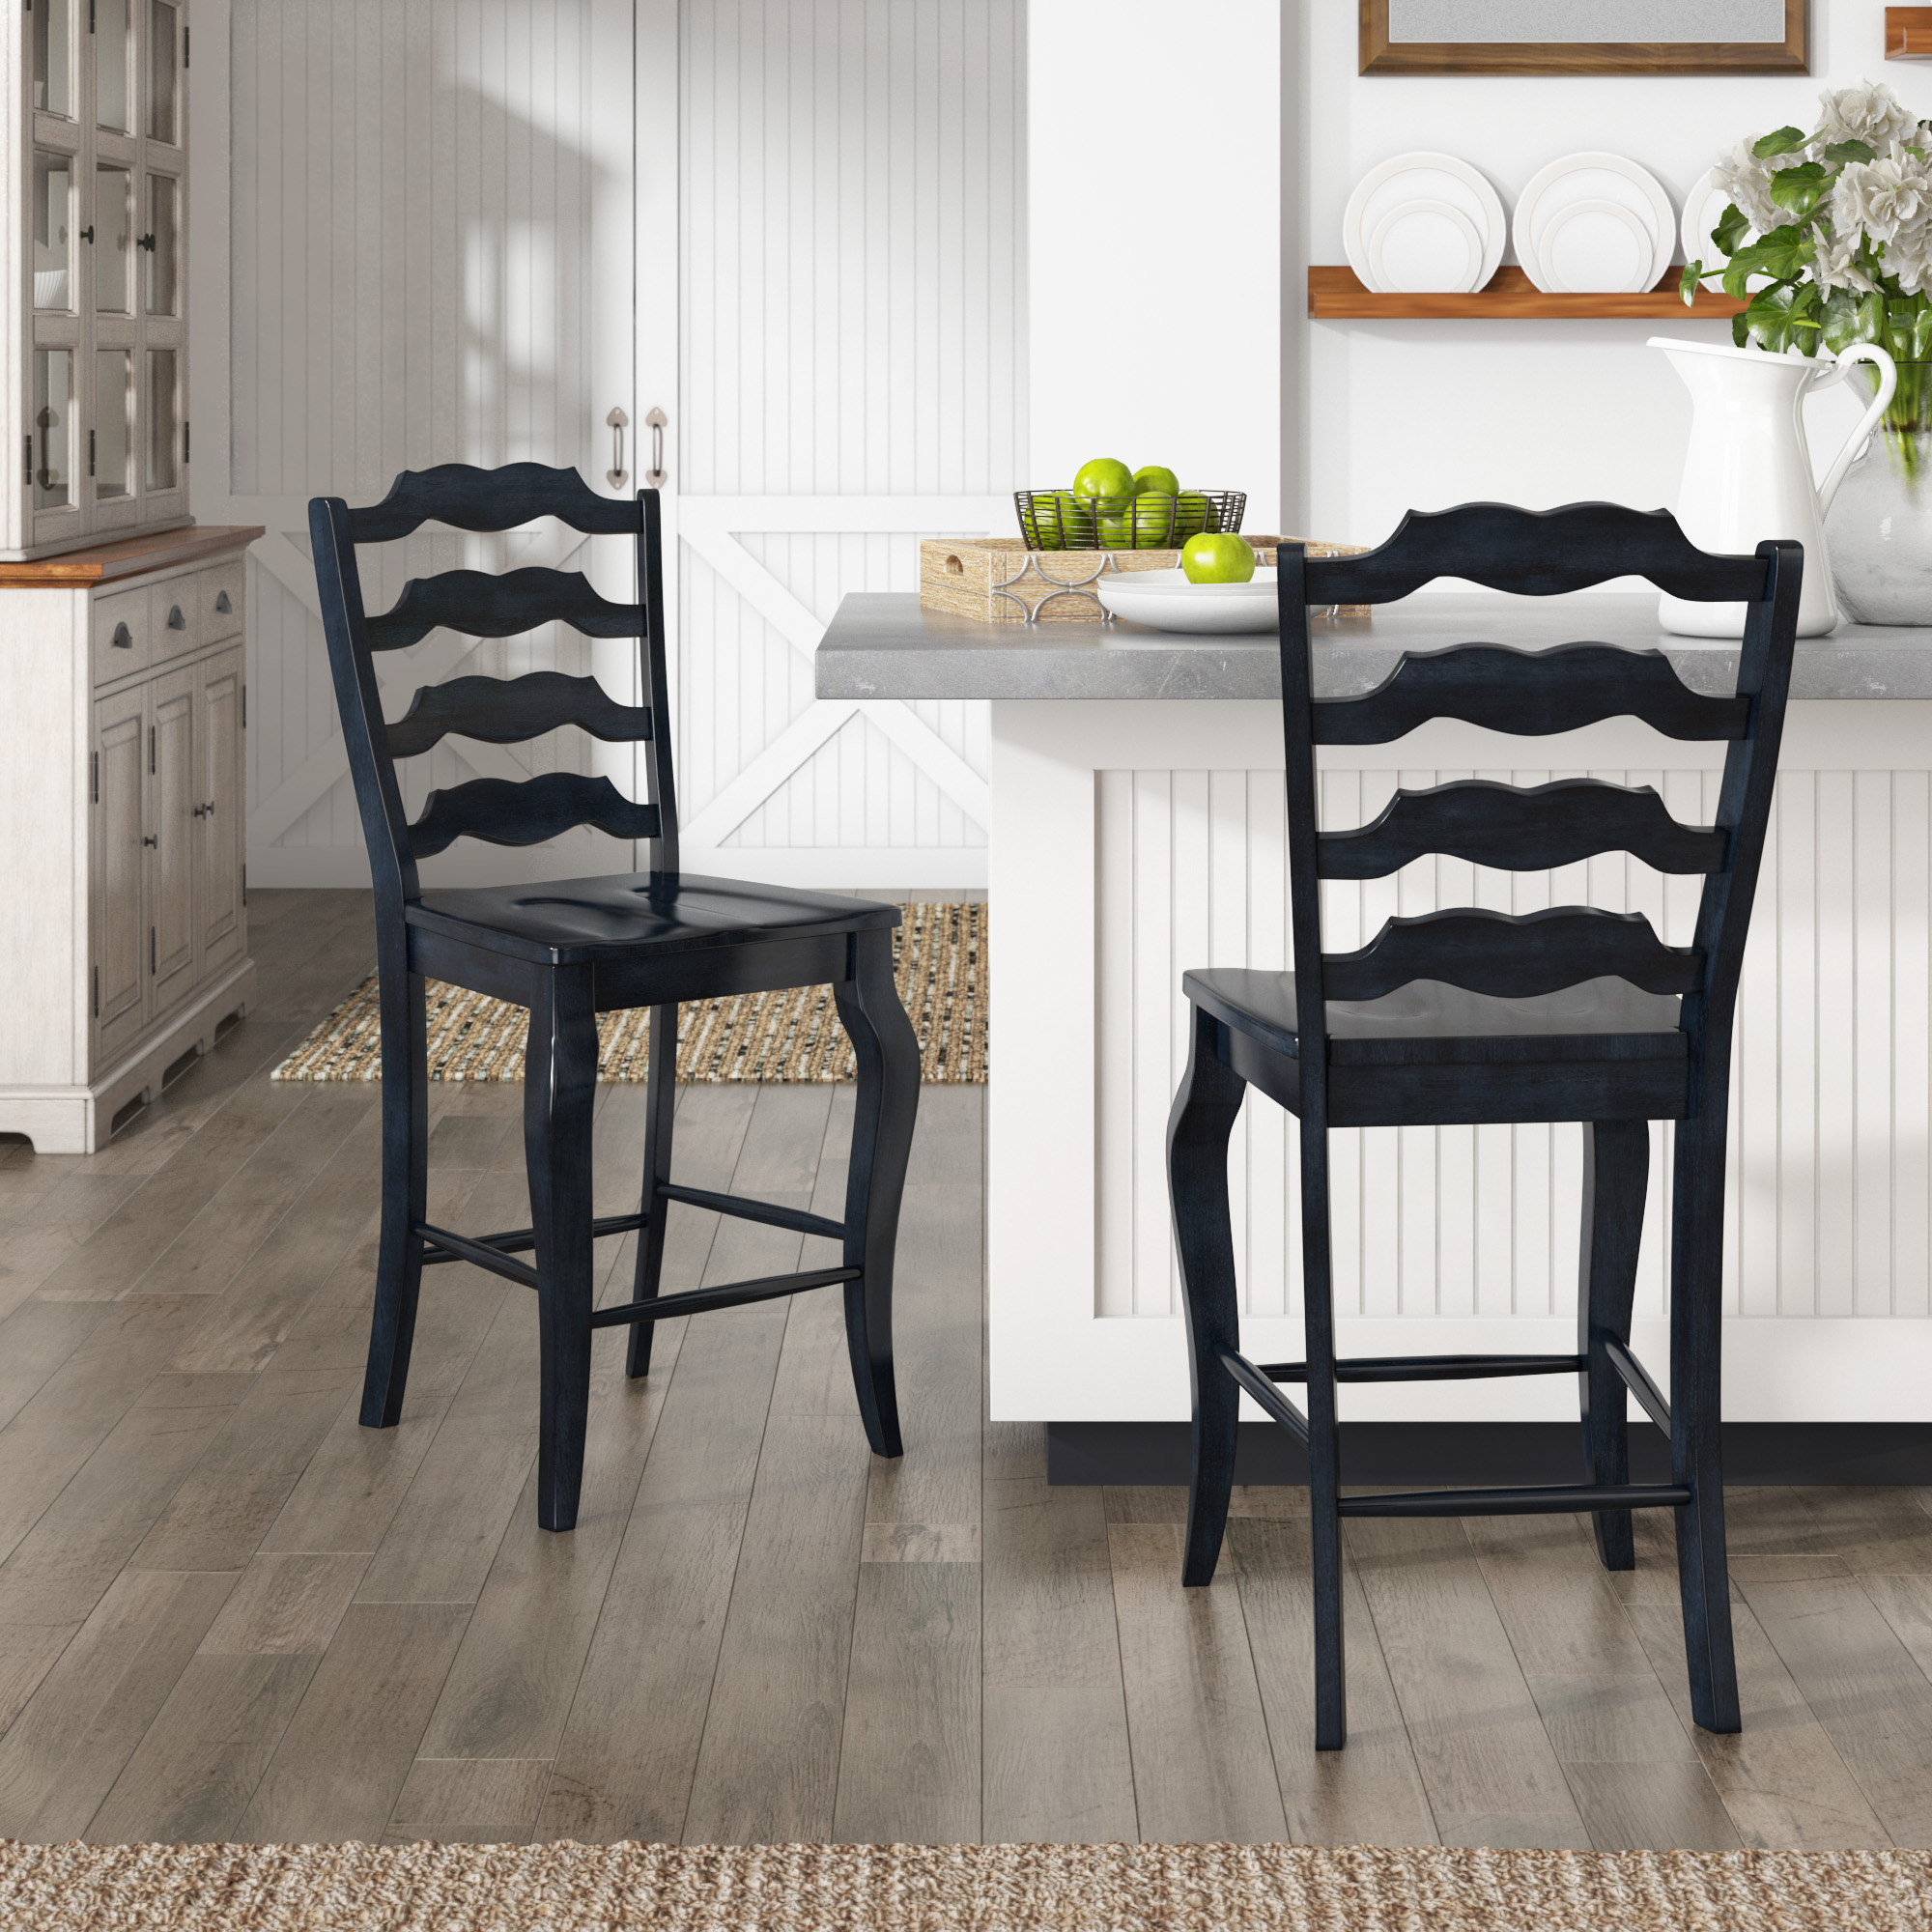 French Ladder Back Wood Counter Height Chairs (Set of 2)